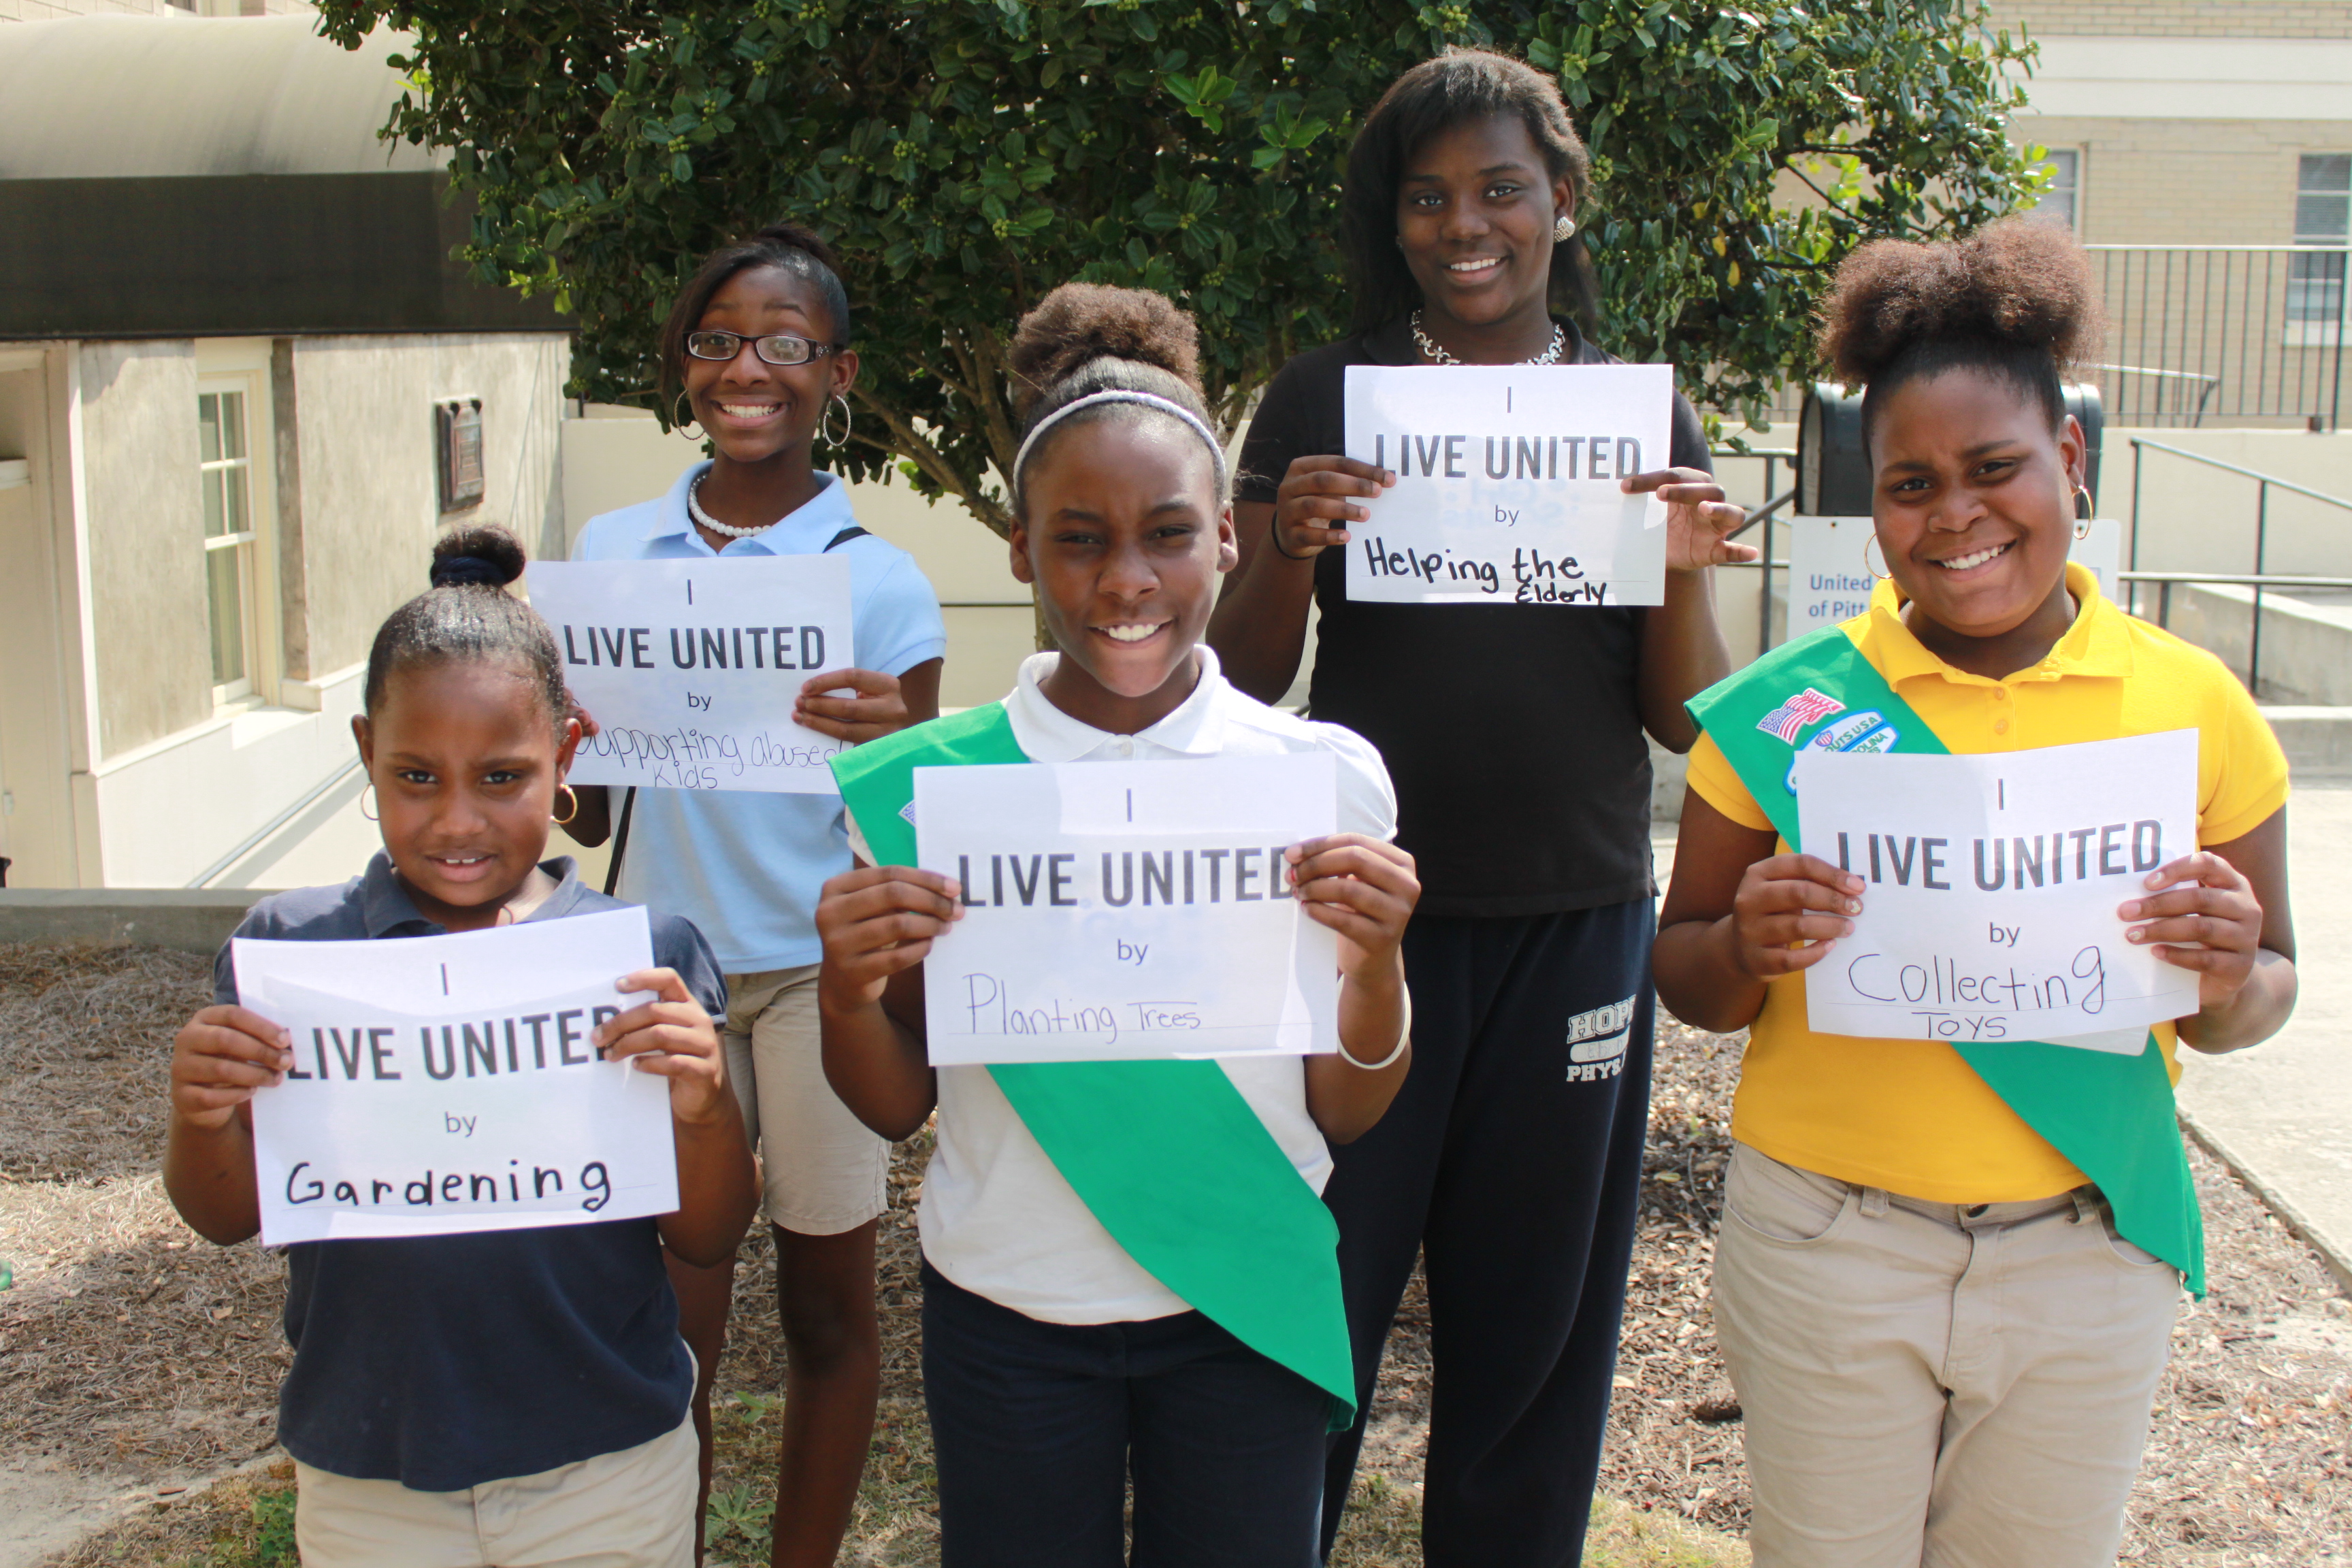 Leaders from our community outreach Girl Scout program share how they "Live United".